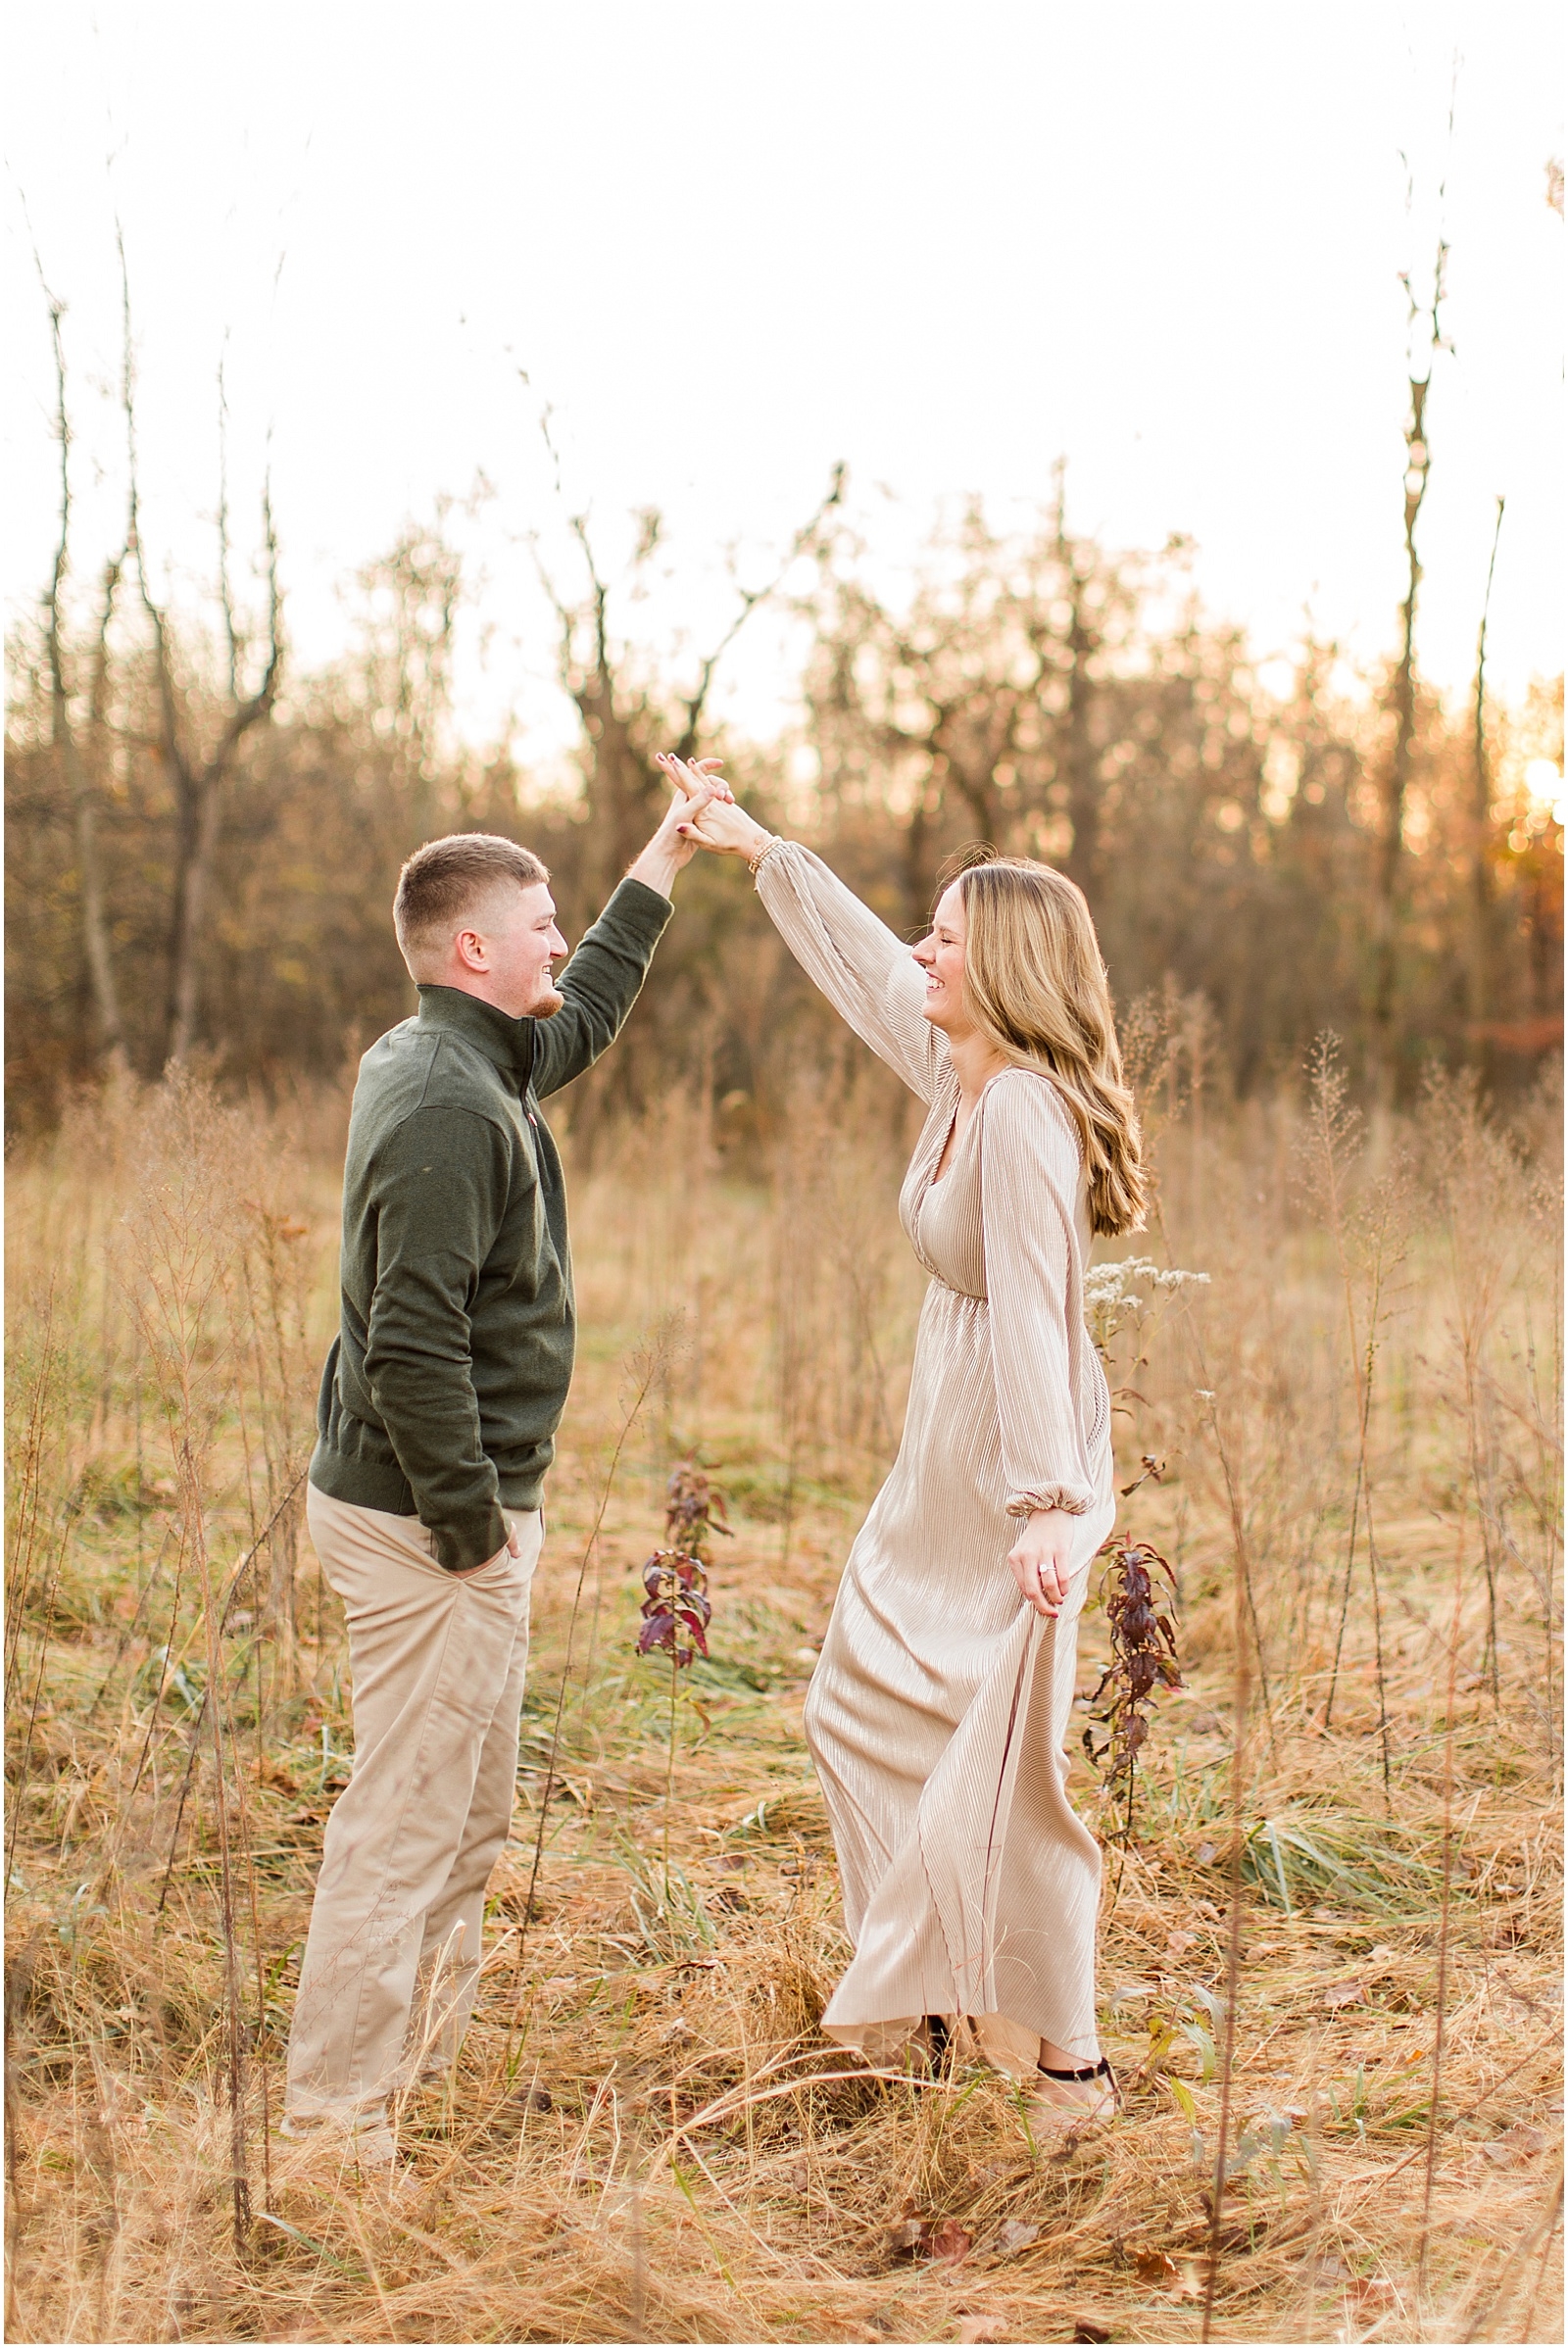 A Fall Southern Indiana Engagement Seesion | Cody and Hannah | Bret and Brandie Photography 046.jpg